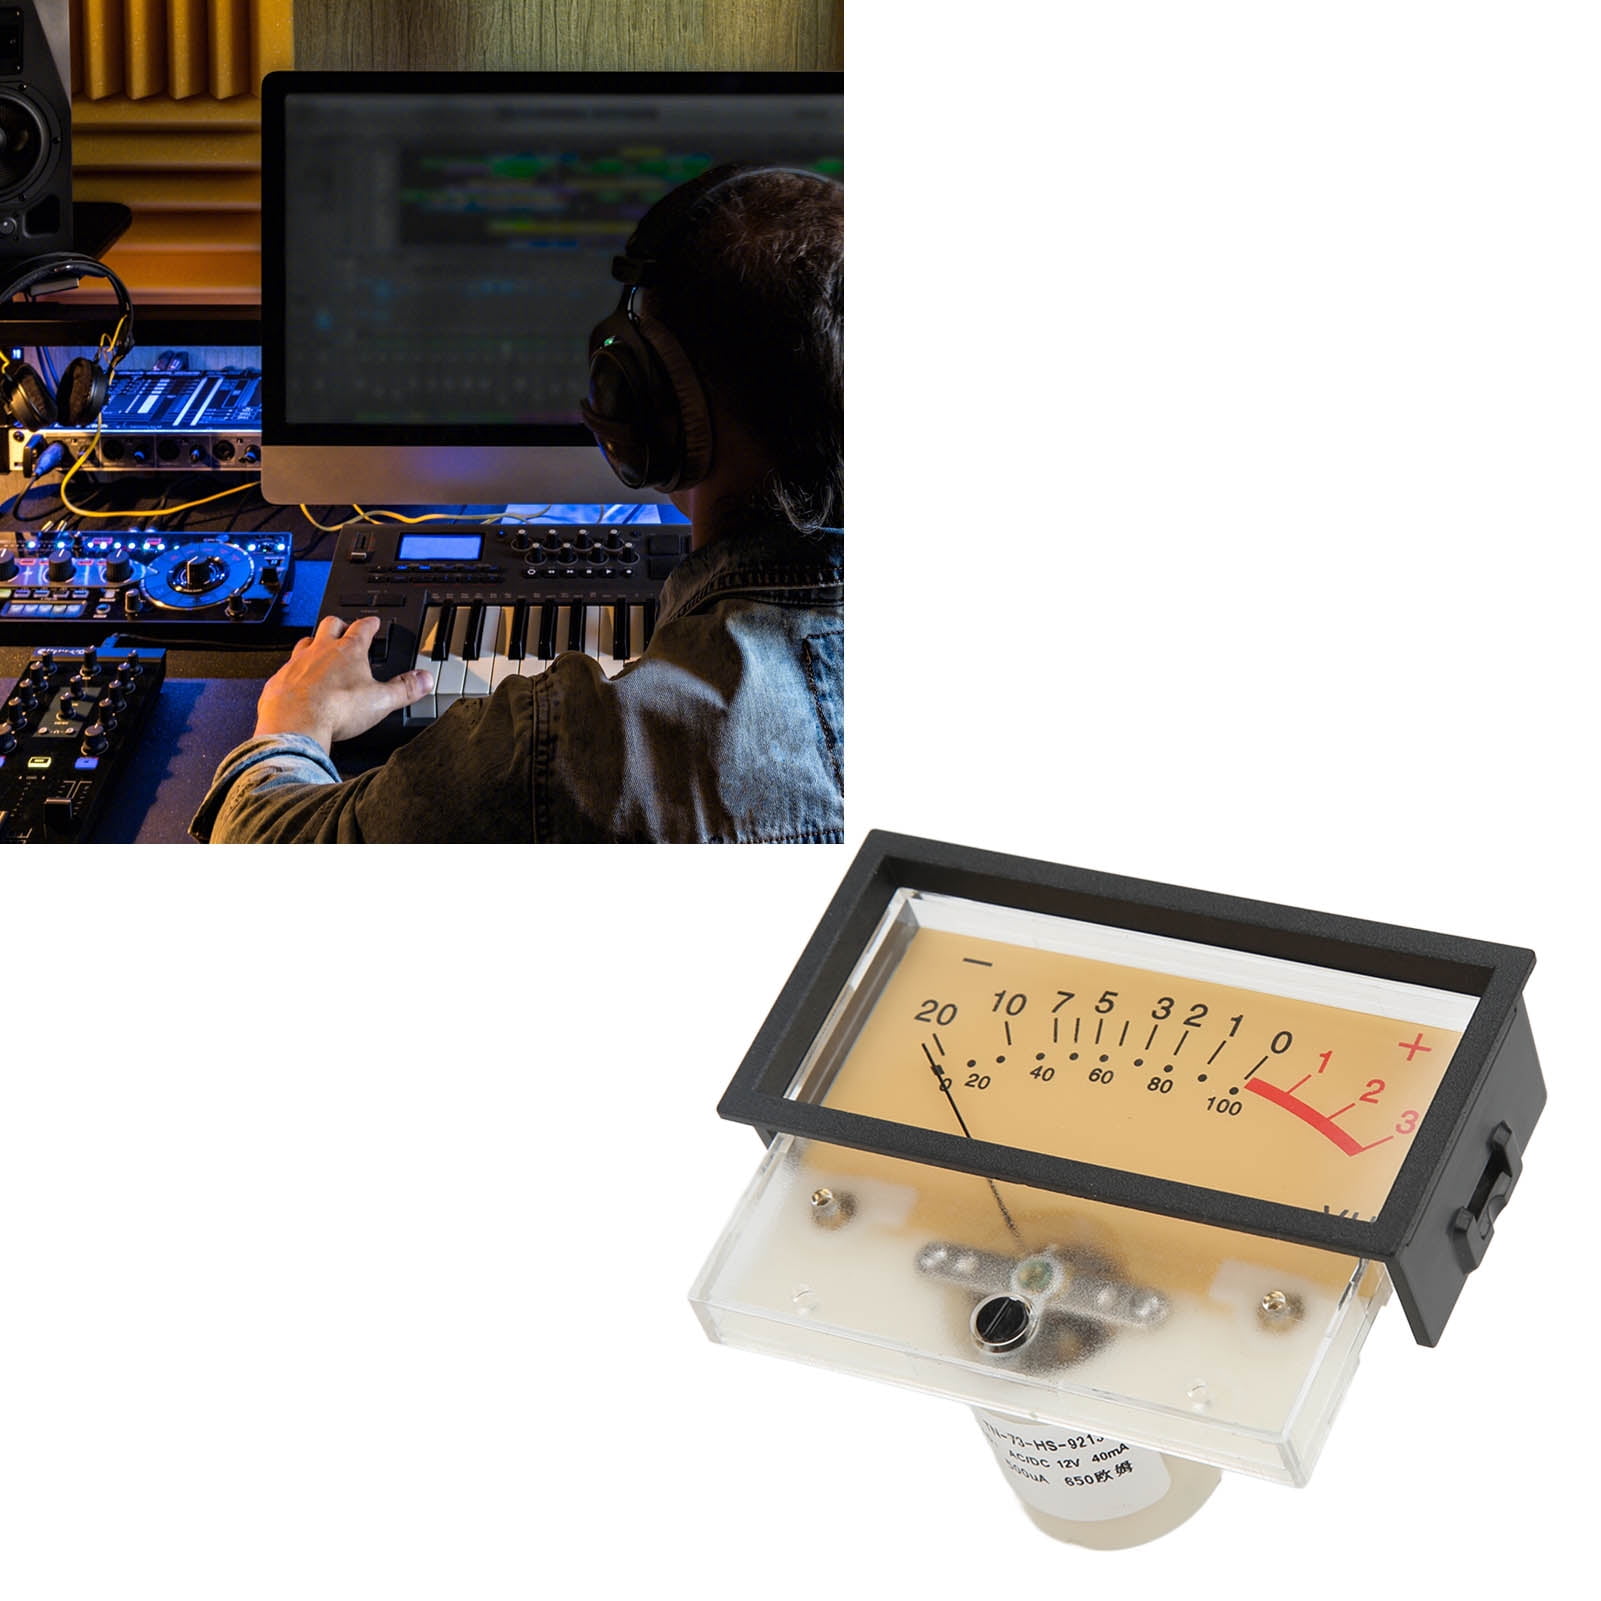 VU Meter, Power Meter Meter High Accuracy Performance For Home Audio For  DIY For Recording Studios 